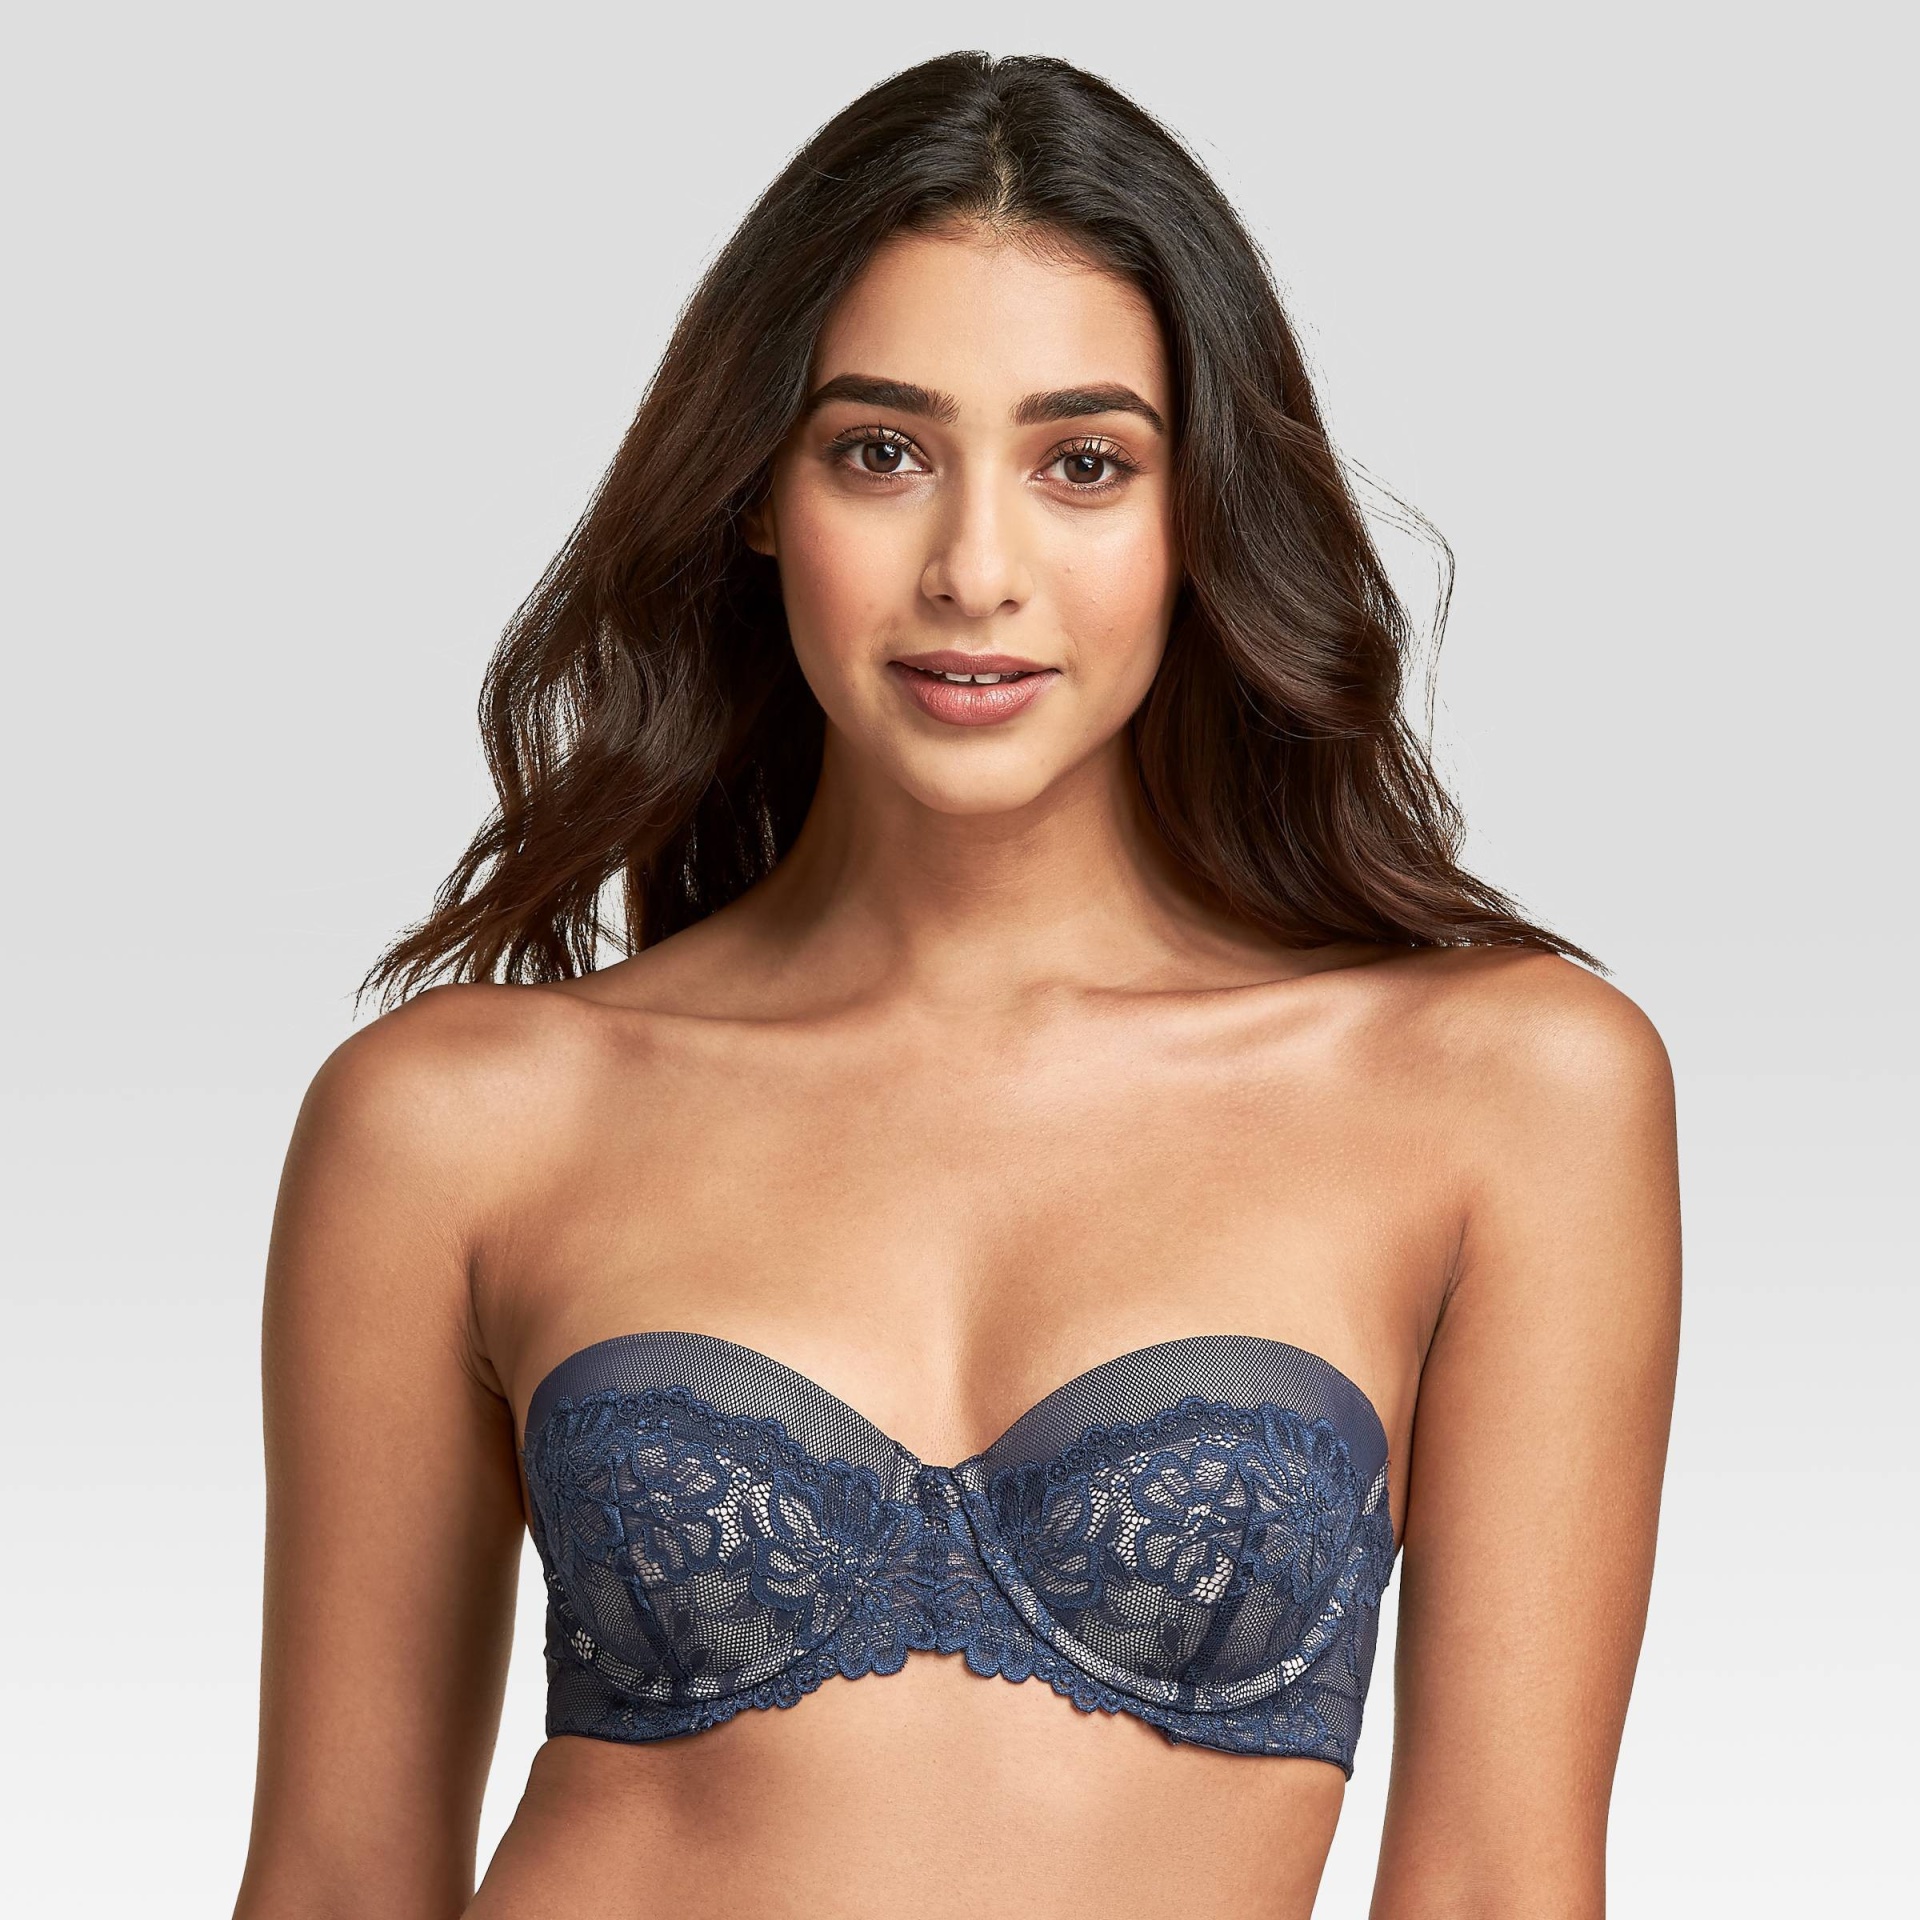 Maidenform Self Expressions Women's Multiway Push-Up Bra SE1102 -  Navy/Gloss 38C